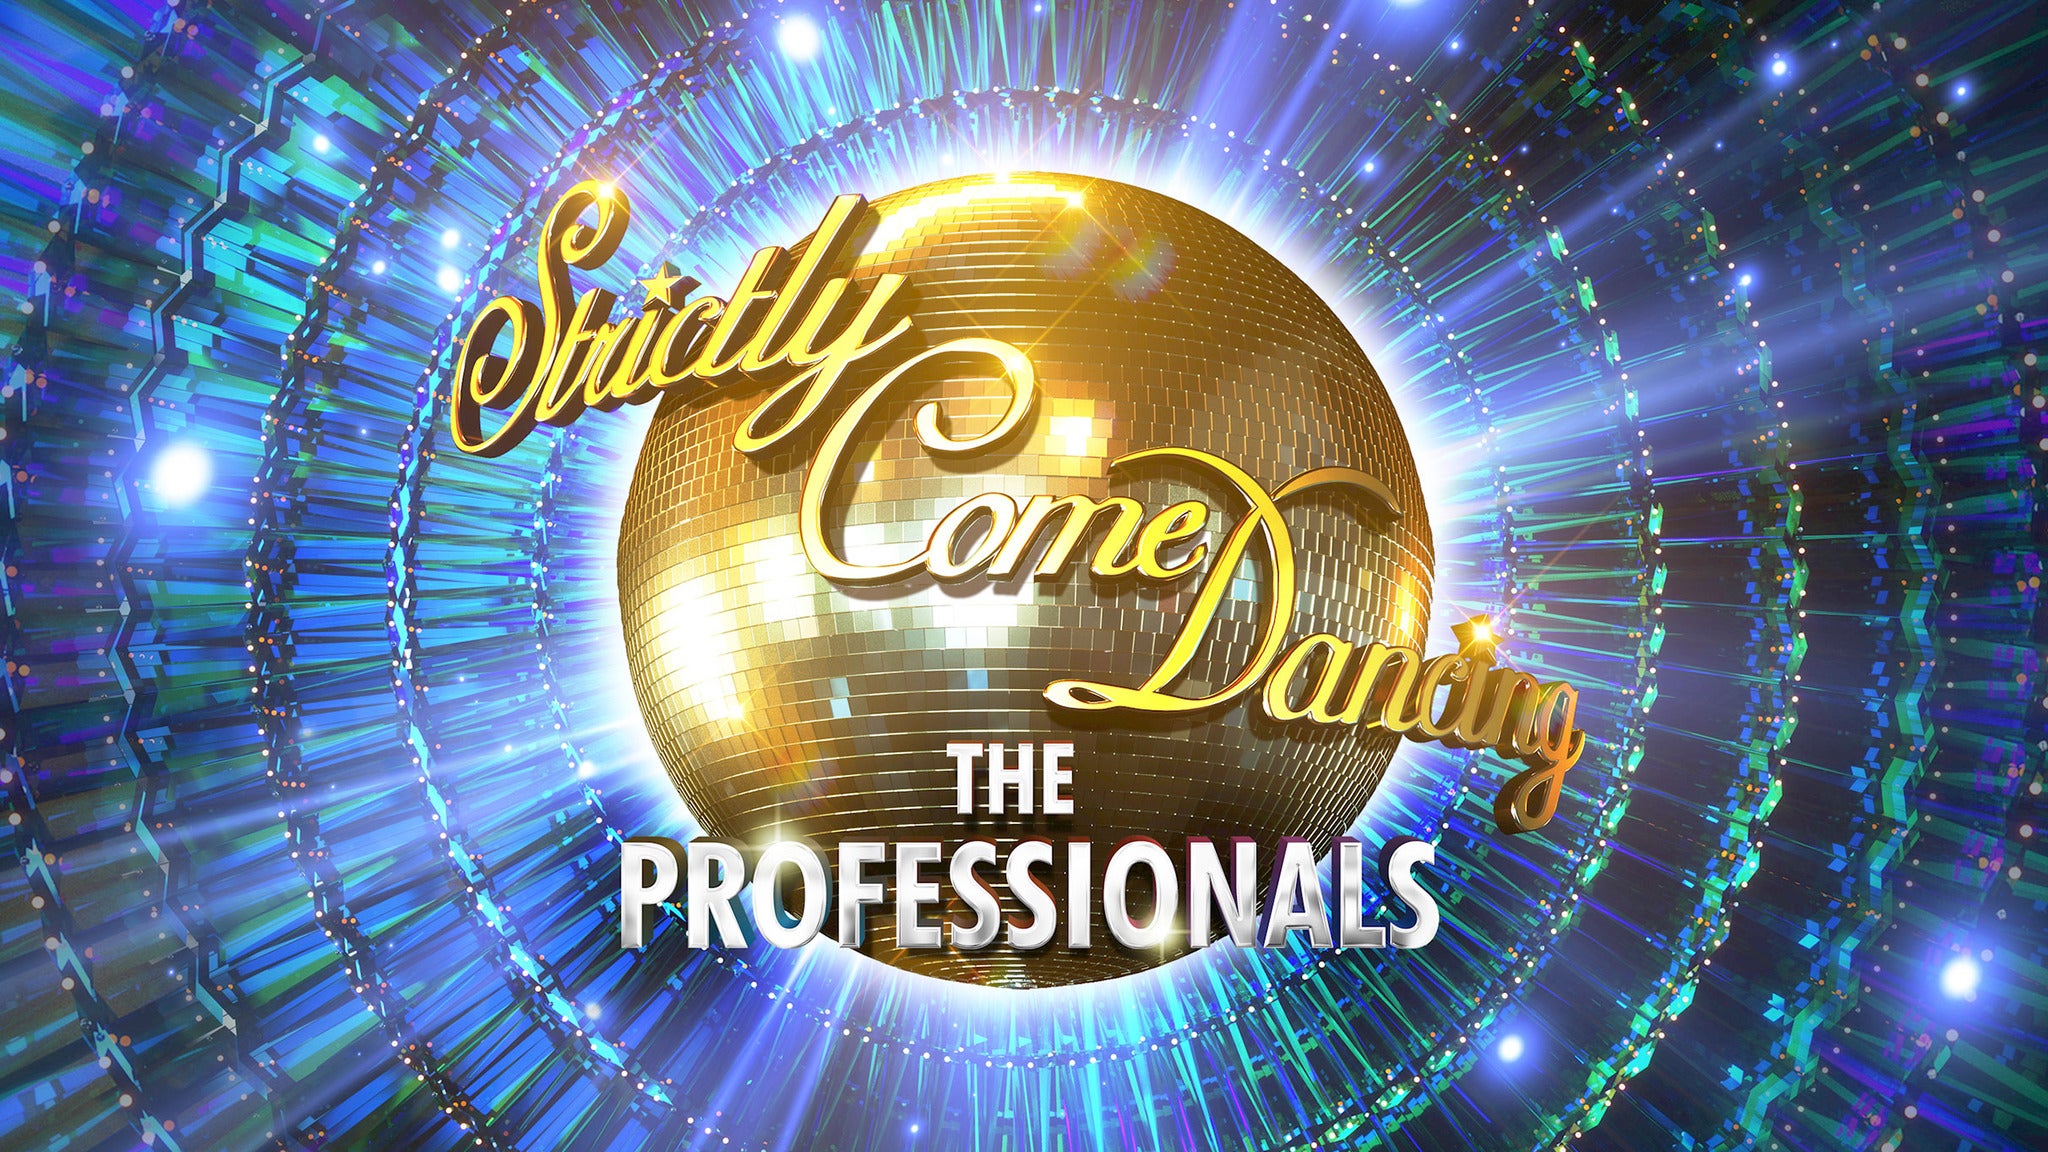 Strictly Come Dancing - the Professionals 2022 Event Title Pic